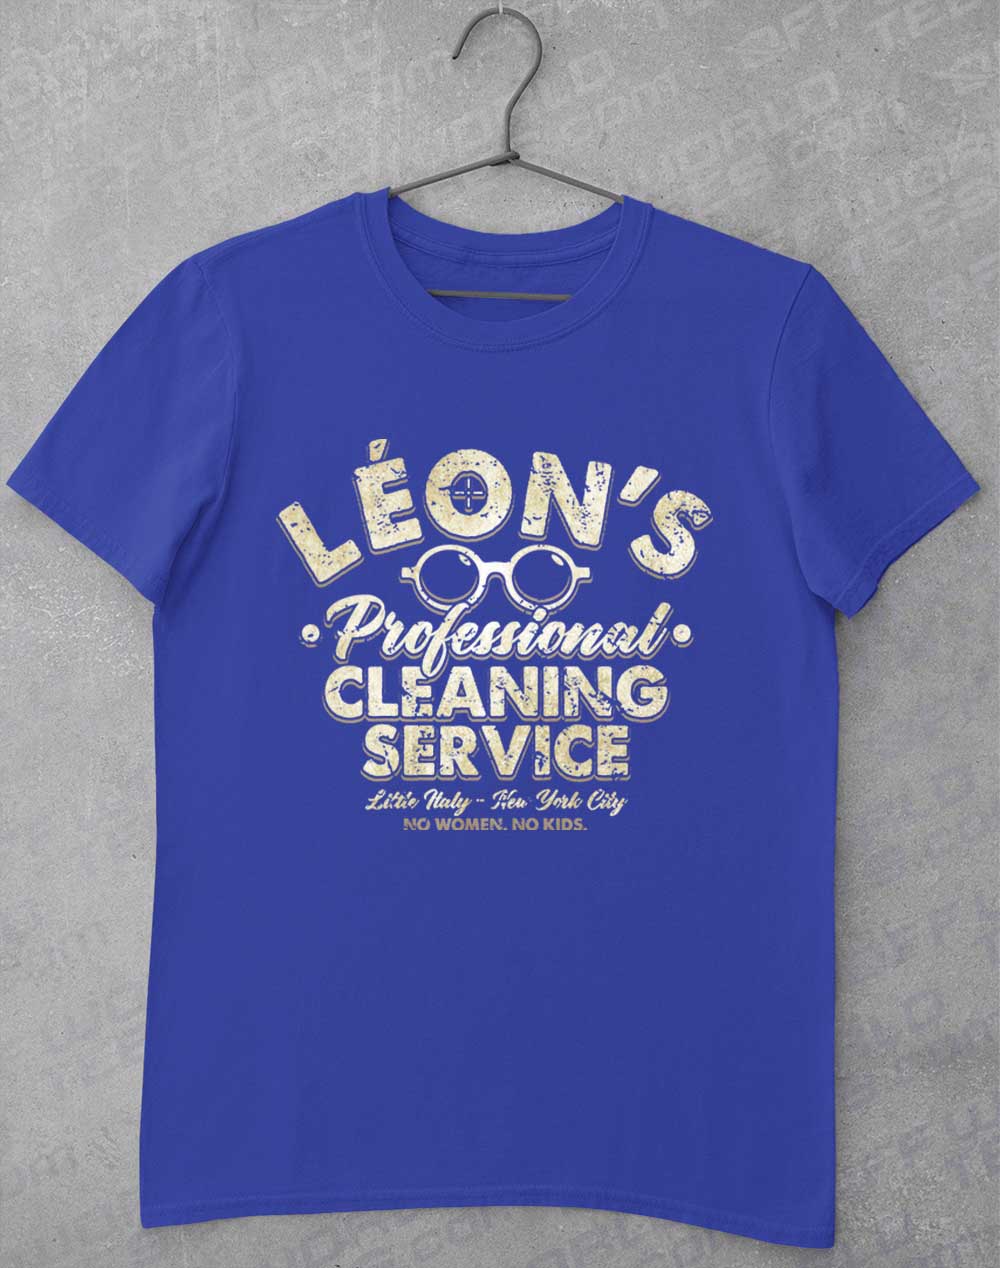 Royal - Leon's Professional Cleaning T-Shirt